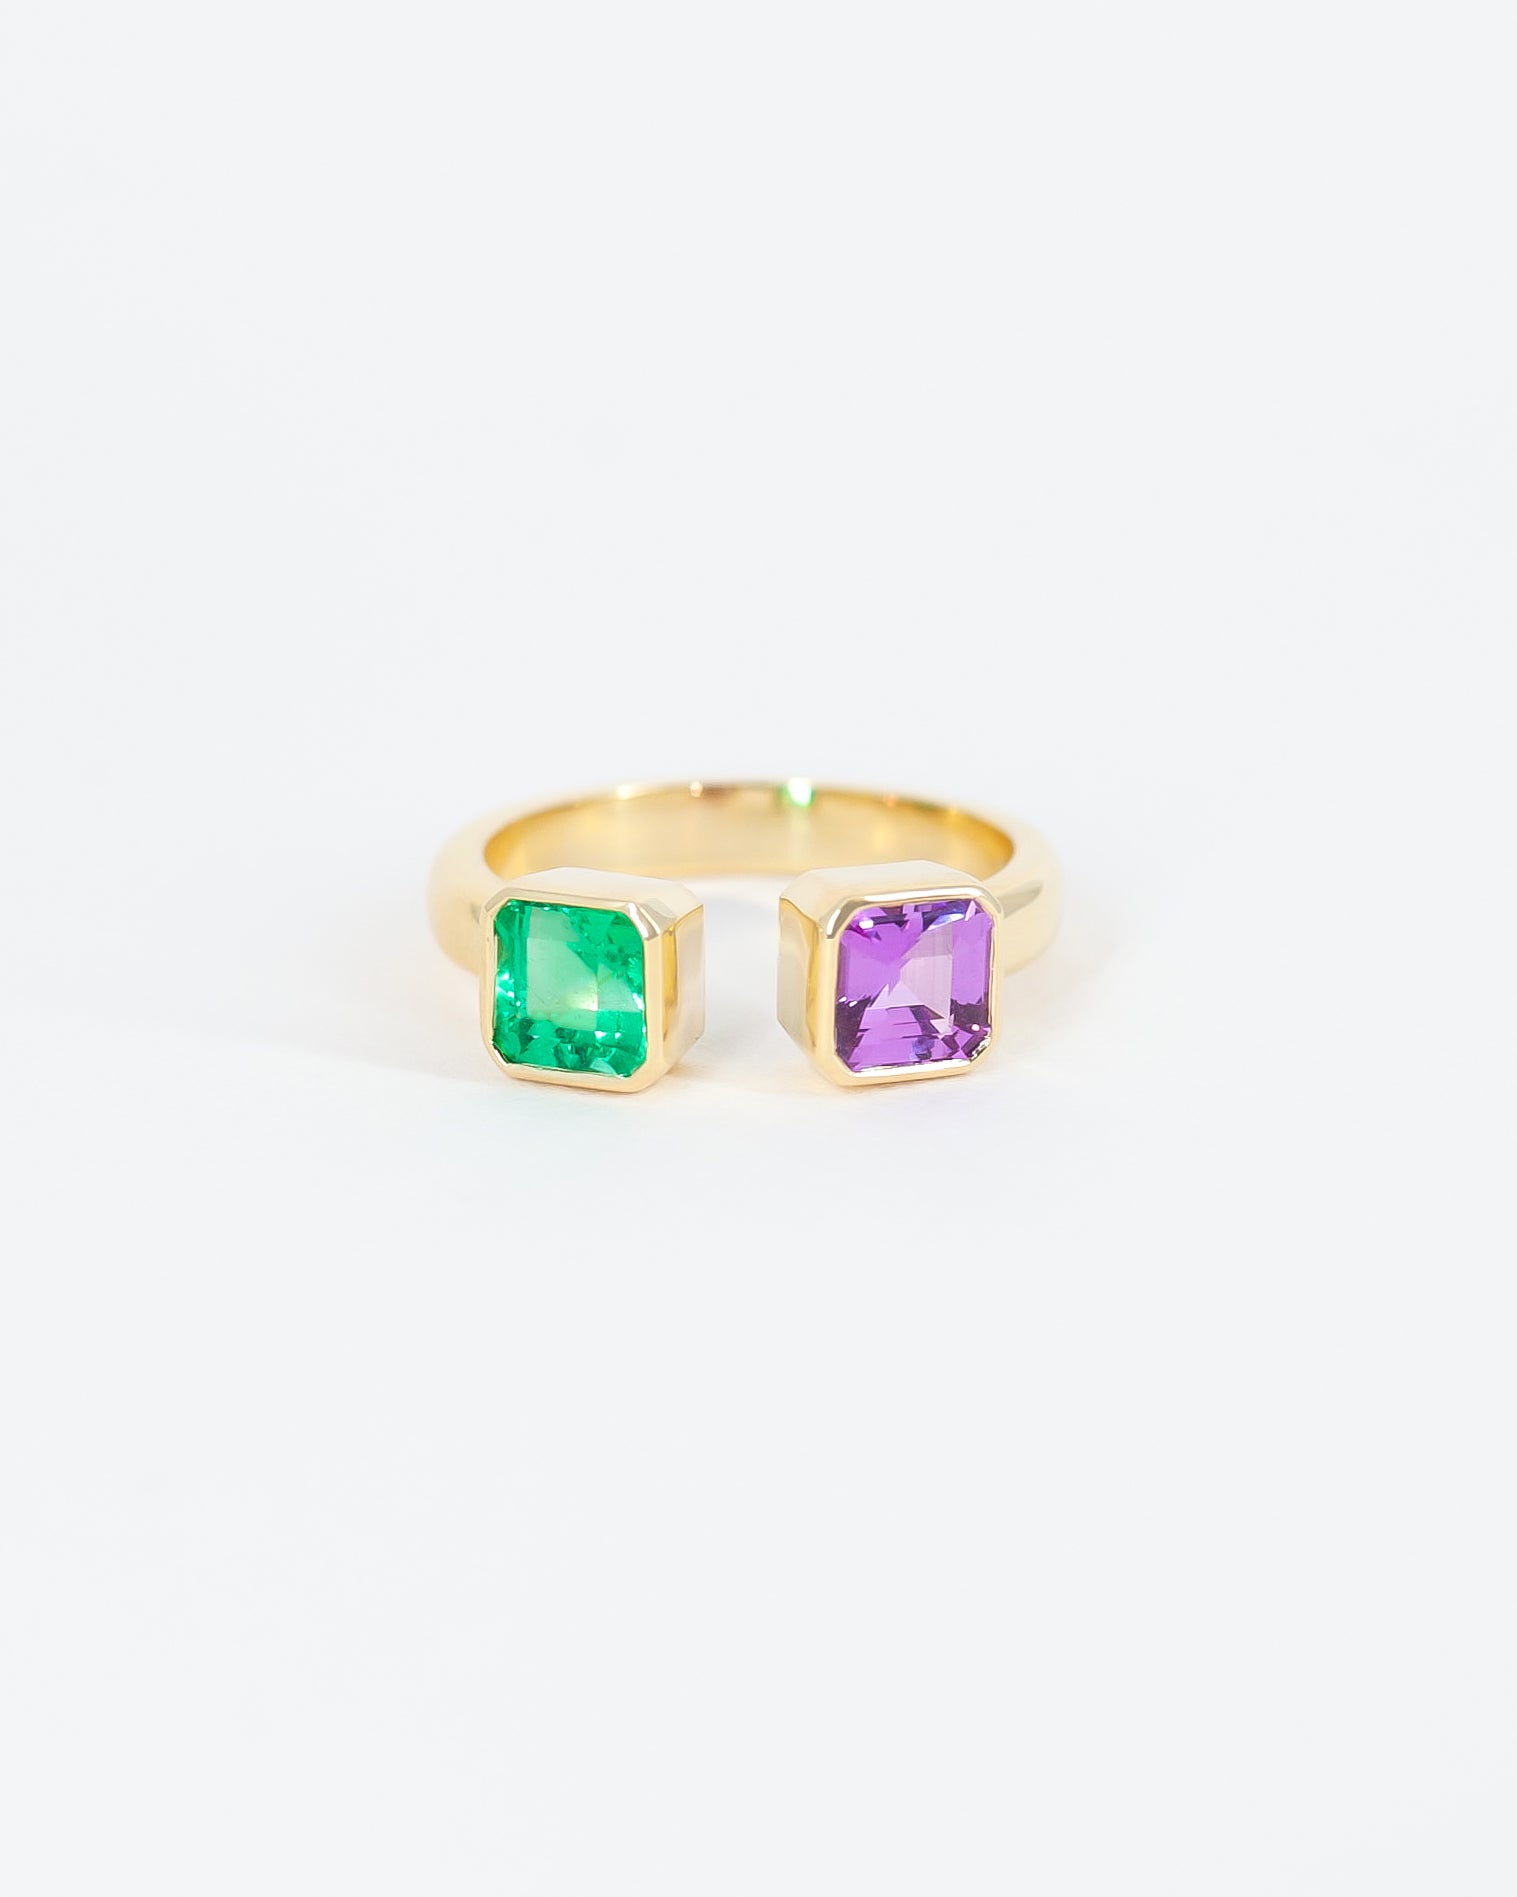 Tiziana's finished ring with her emerald paired alongside an emerald-cut sapphire